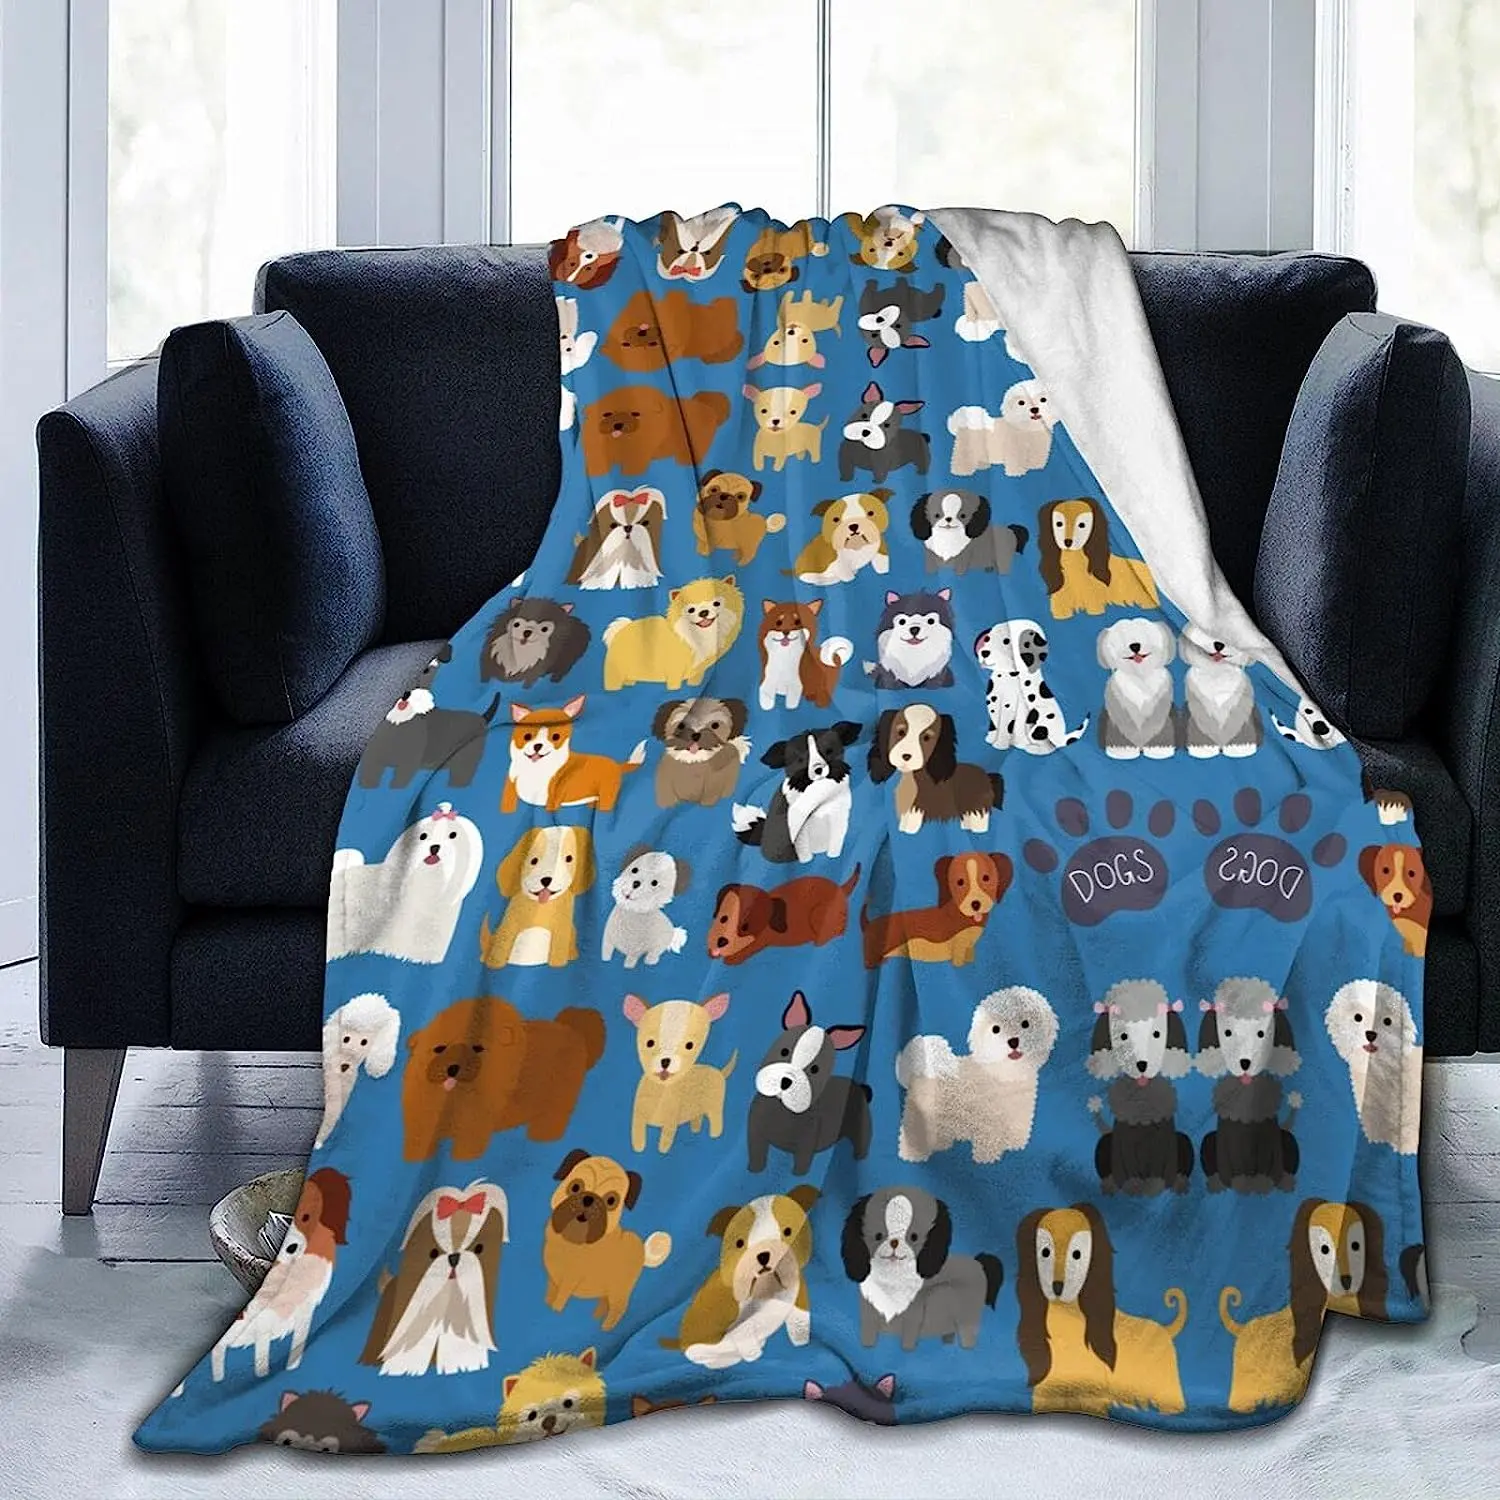 Cute Dog and Puppy Theme Comfort Print Flannel Throw BlanketCouch Sofa Bed Office Decorative Travelling Mink Blankets For Winter